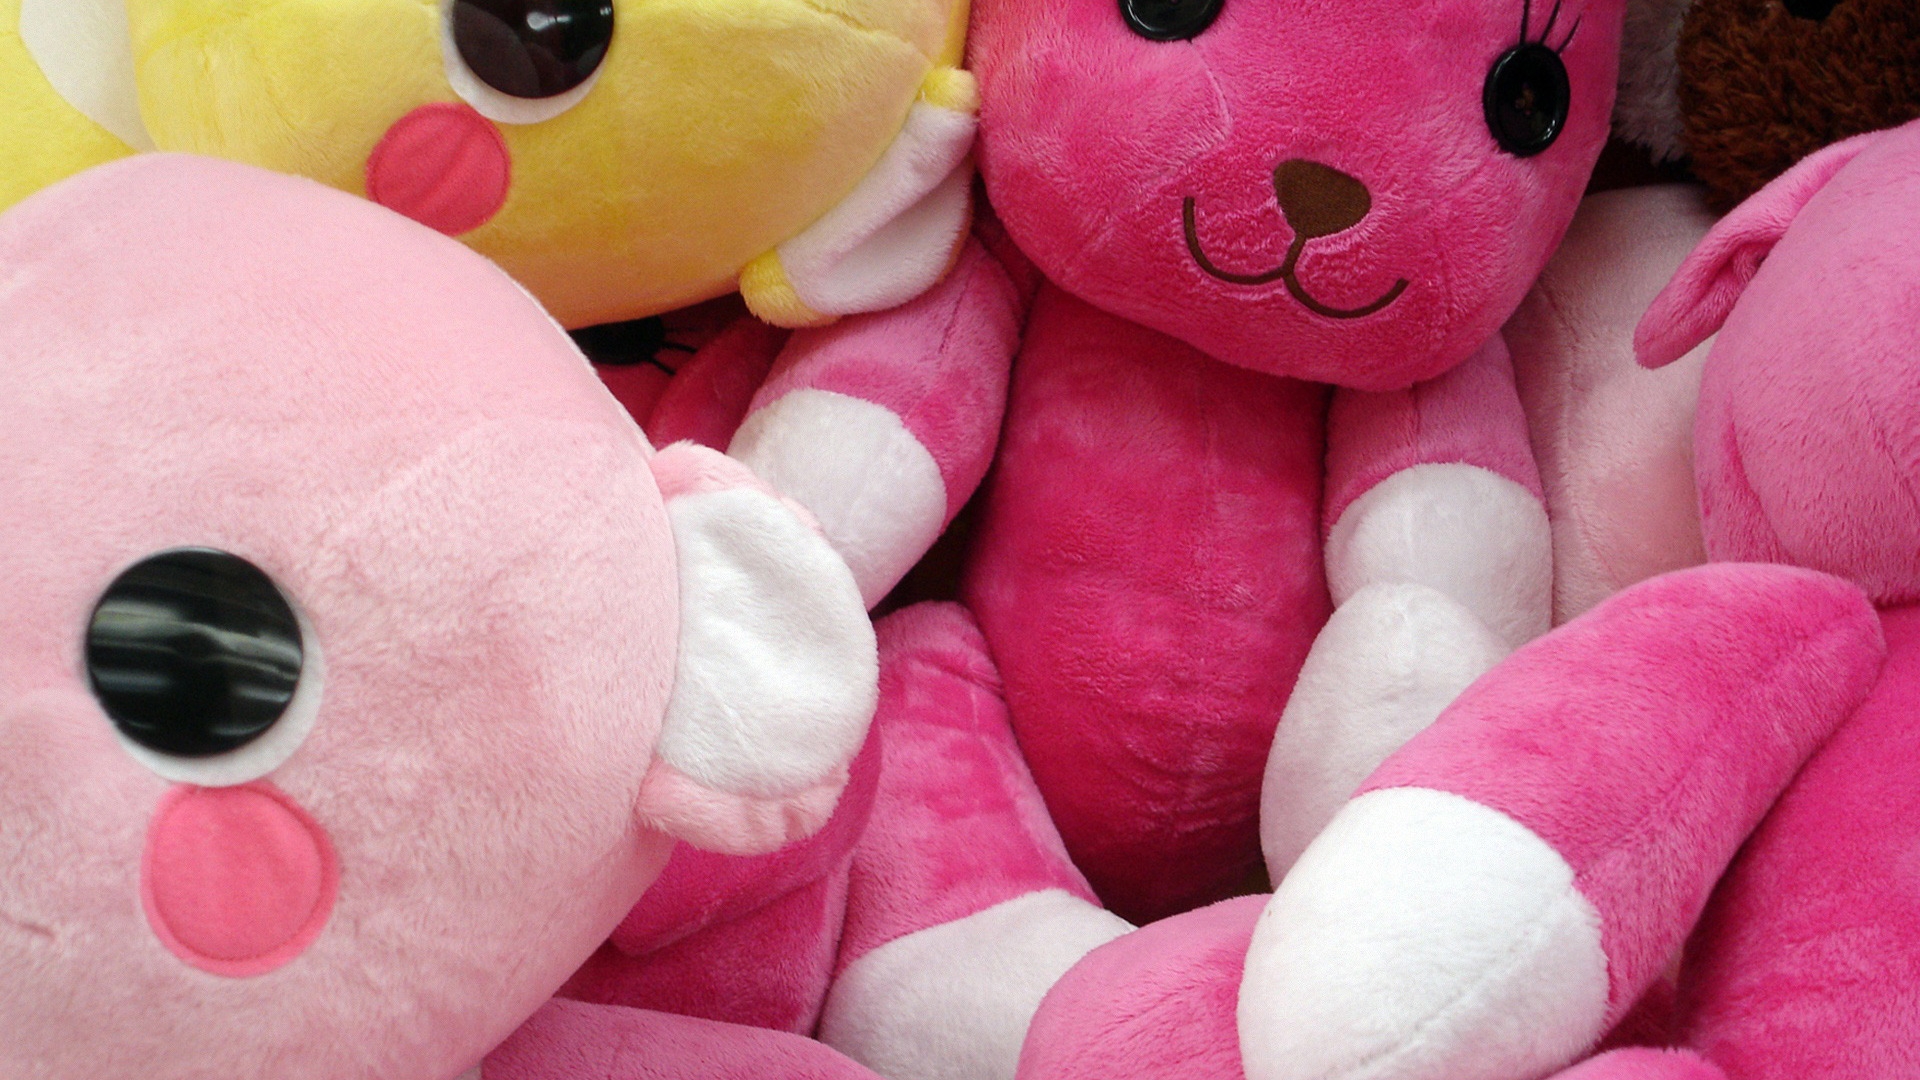 Pink Teddy Bears for 1920 x 1080 HDTV 1080p resolution